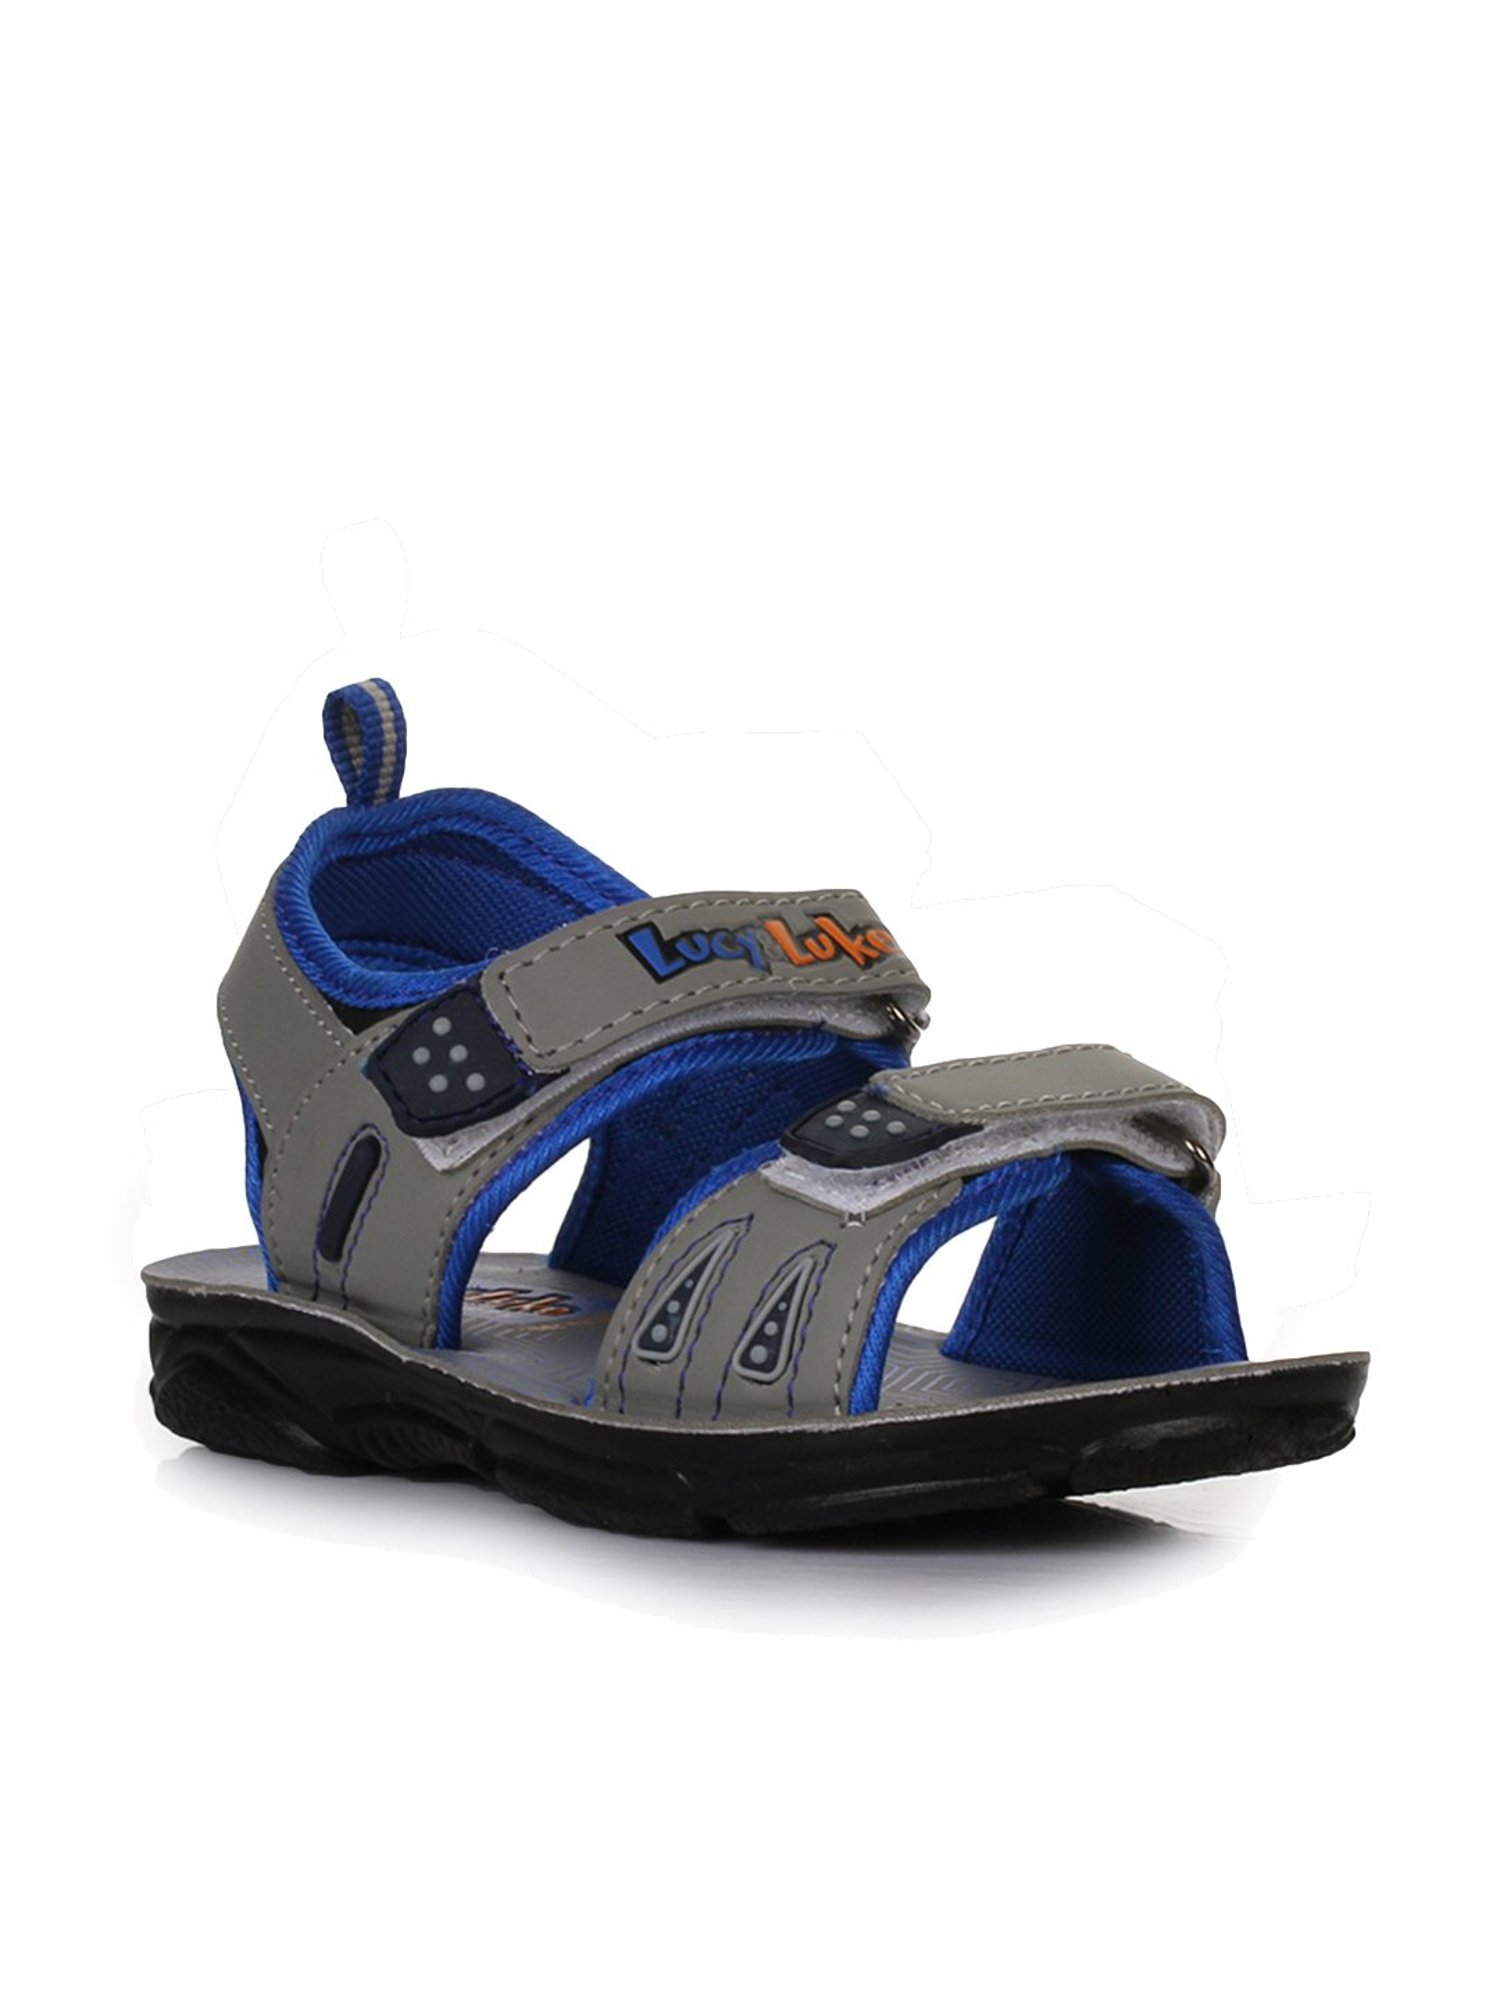 lucy blue sandals